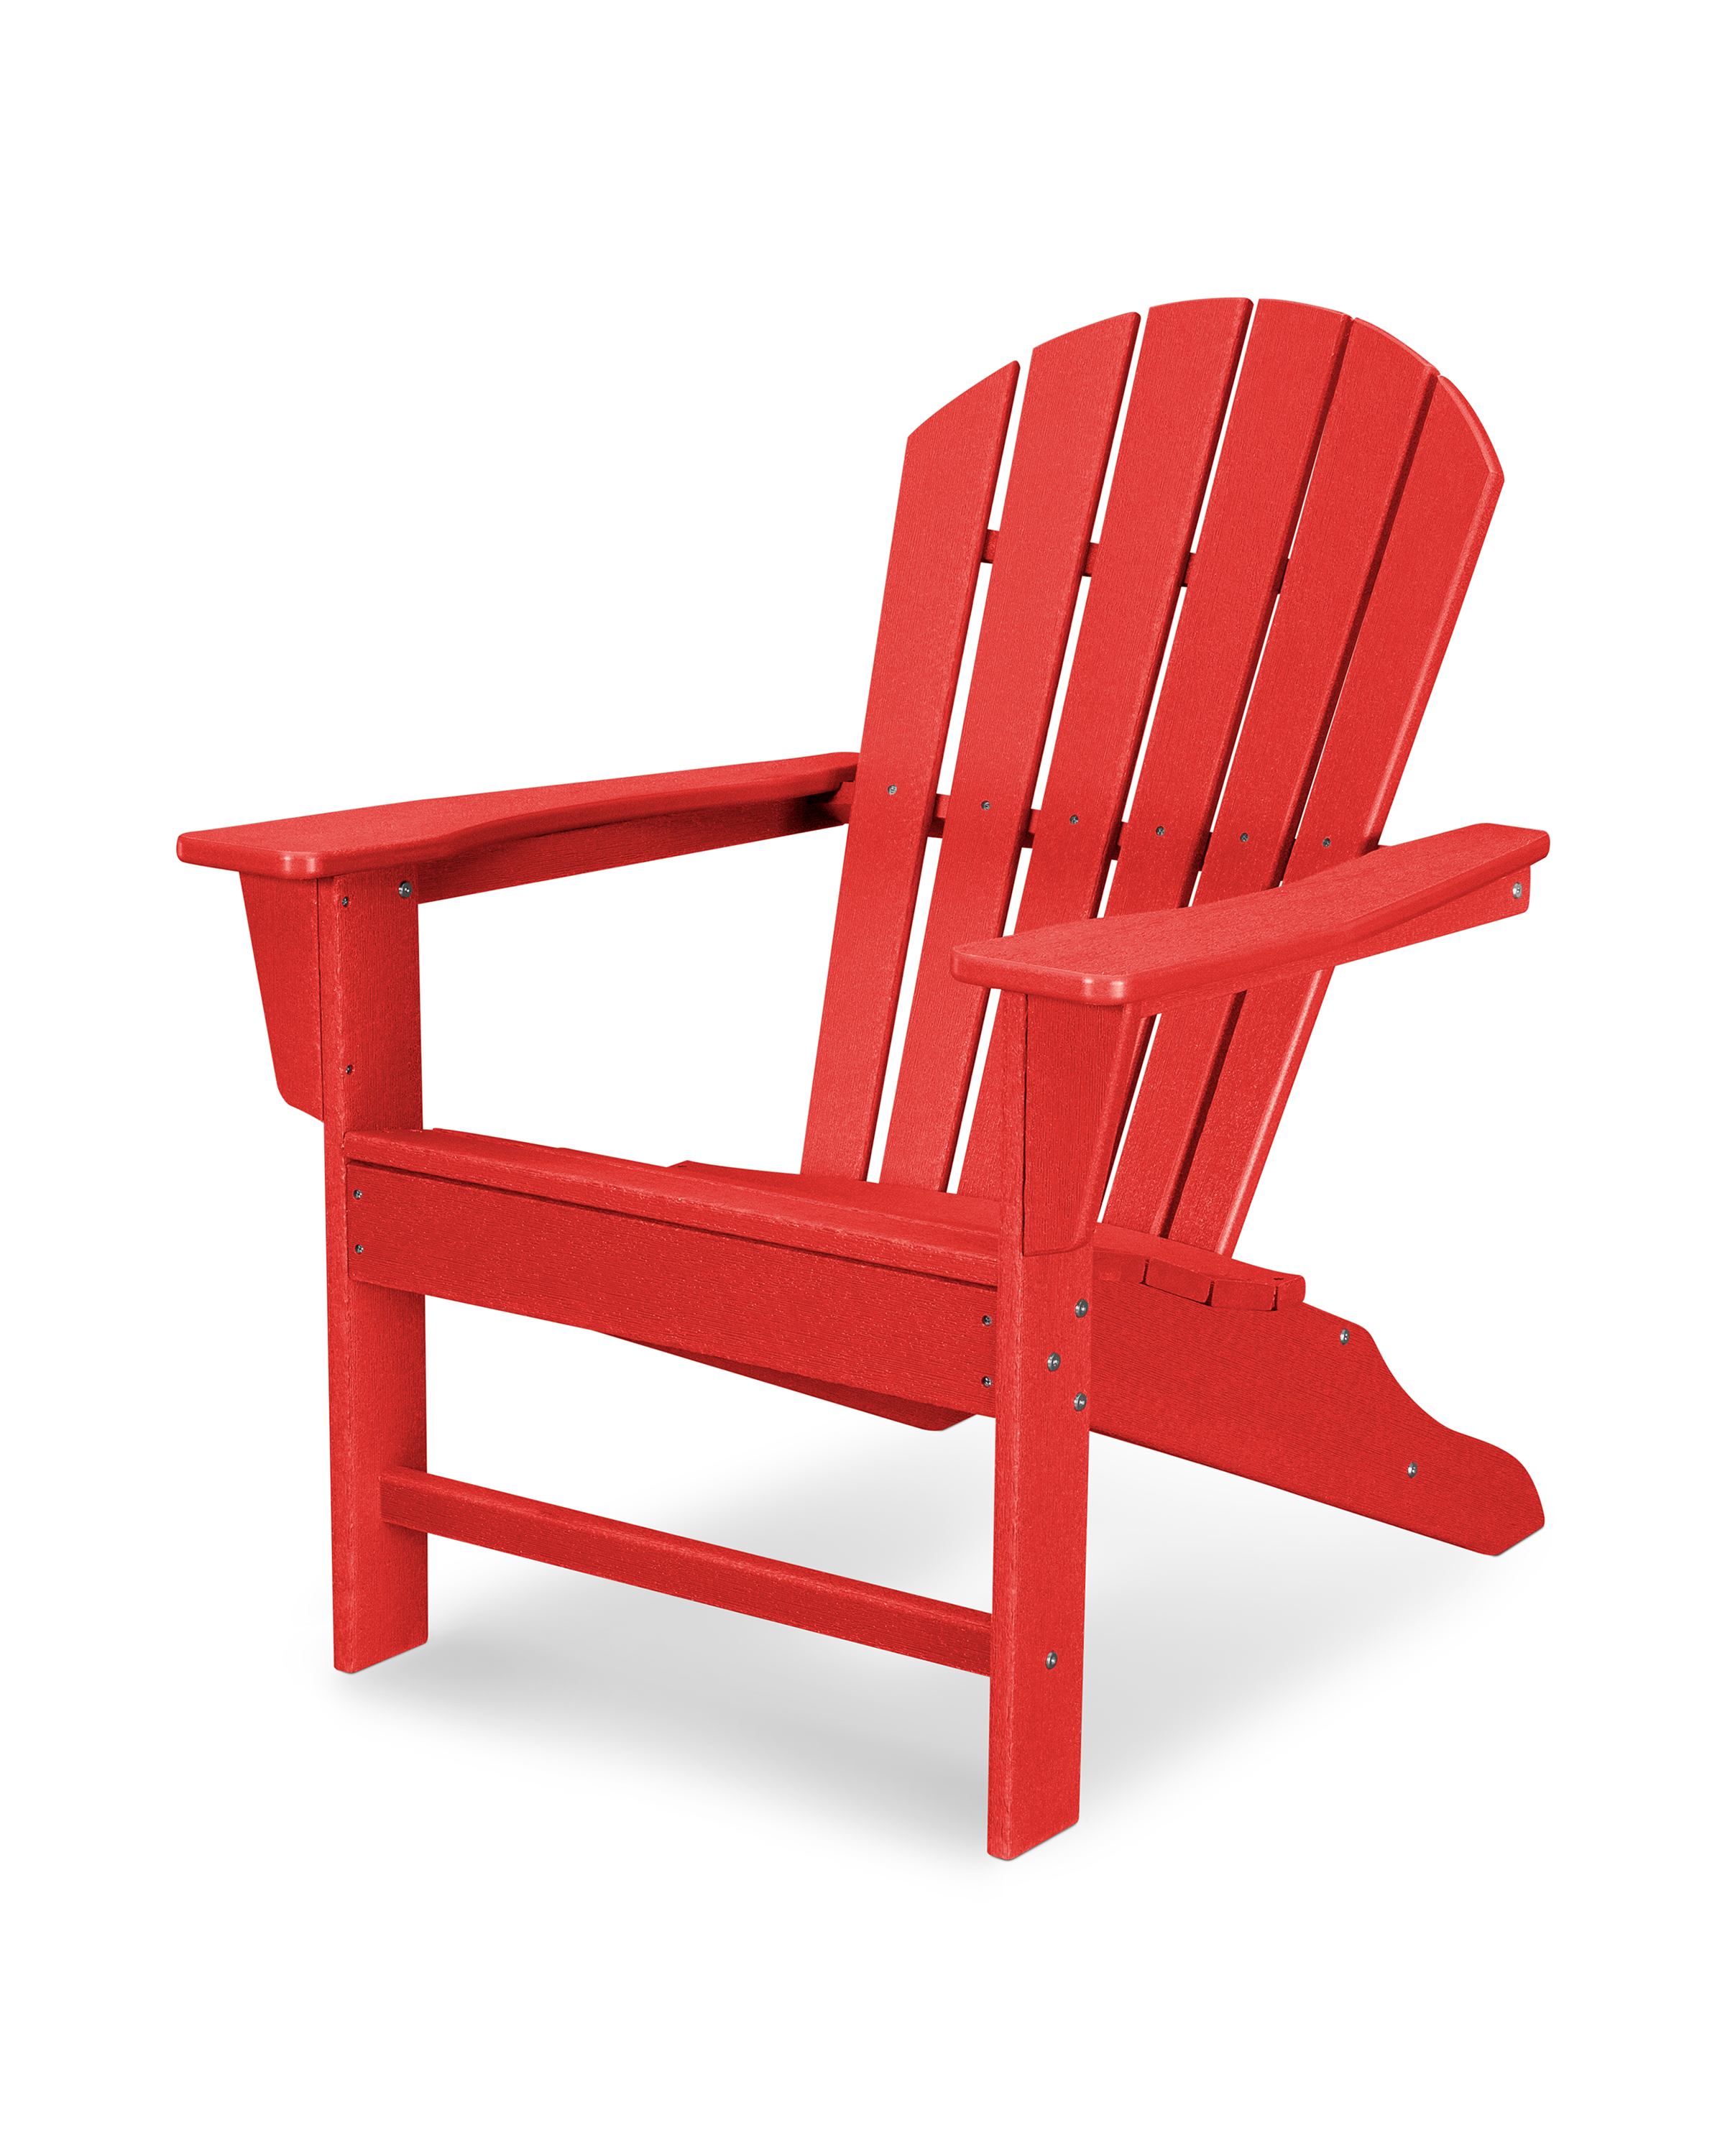 south beach adirondack in vintage sunset red product image